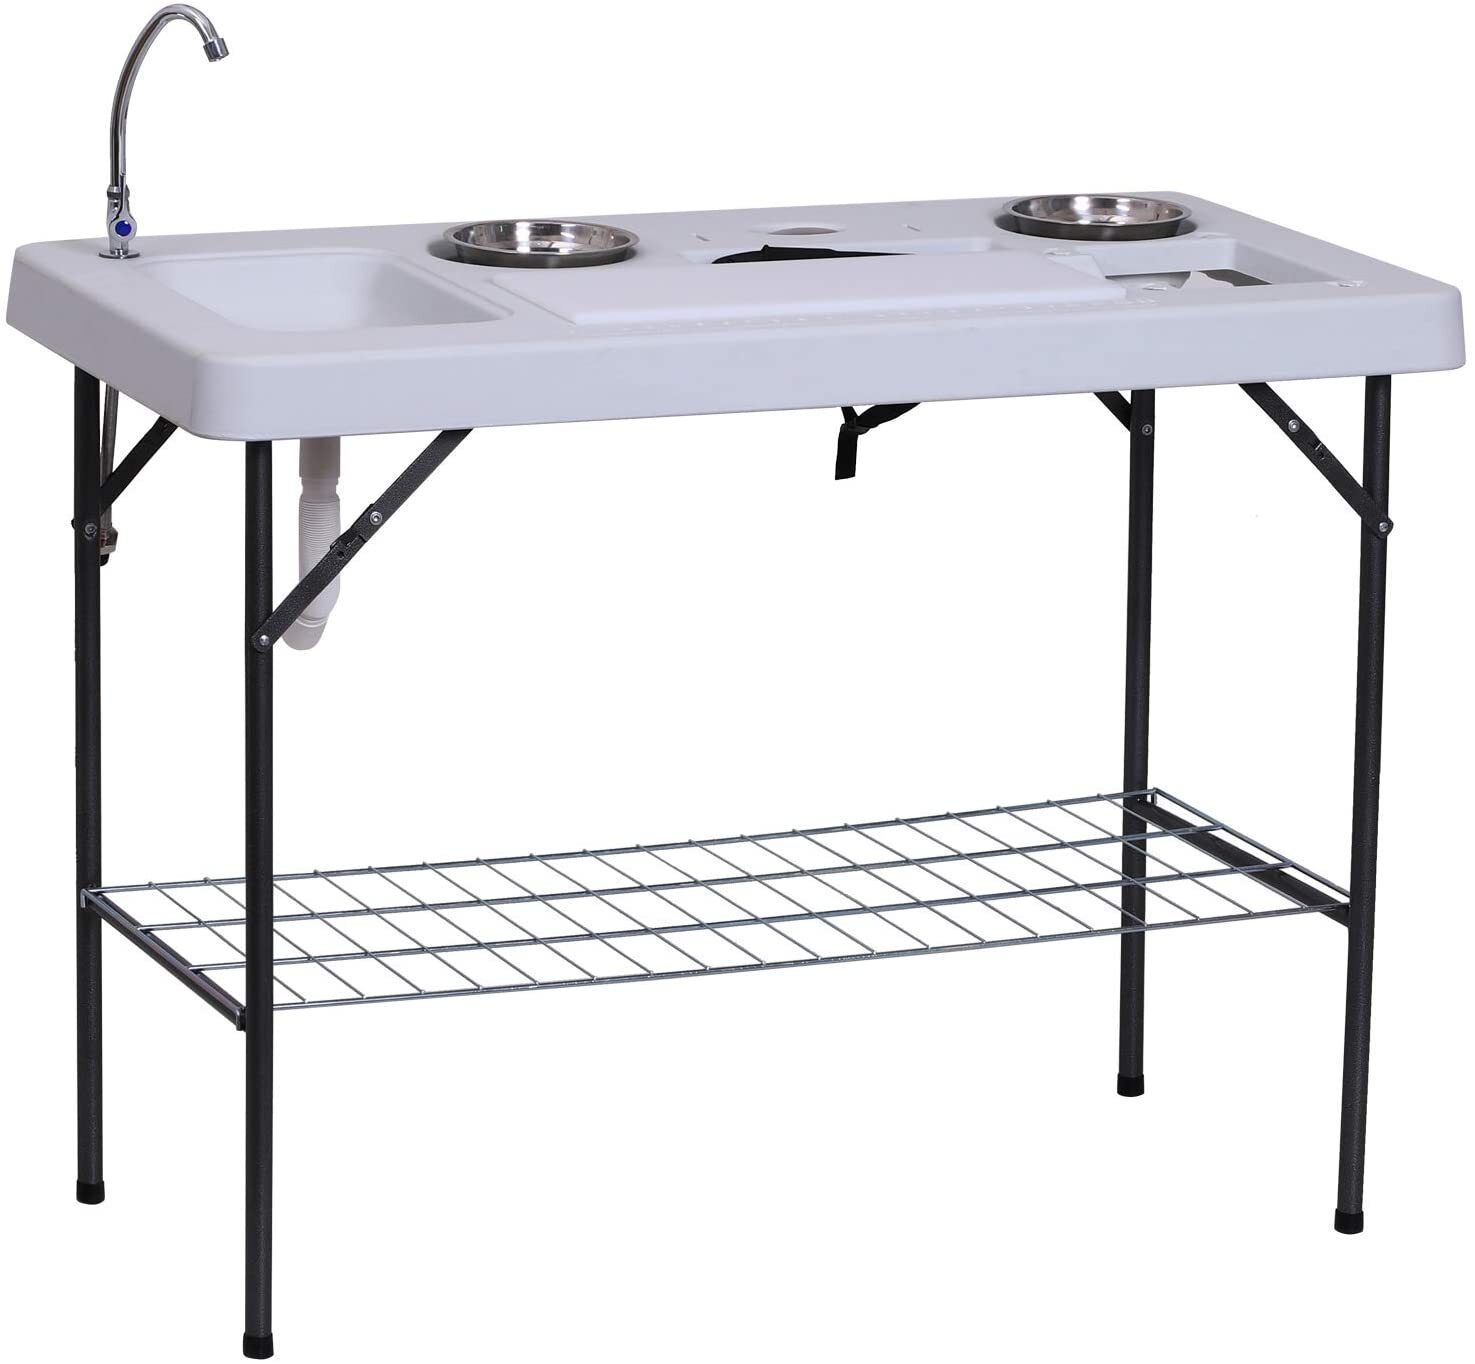 Outdoor Kitchen Sink For Camping Kitchen Appliances Tips